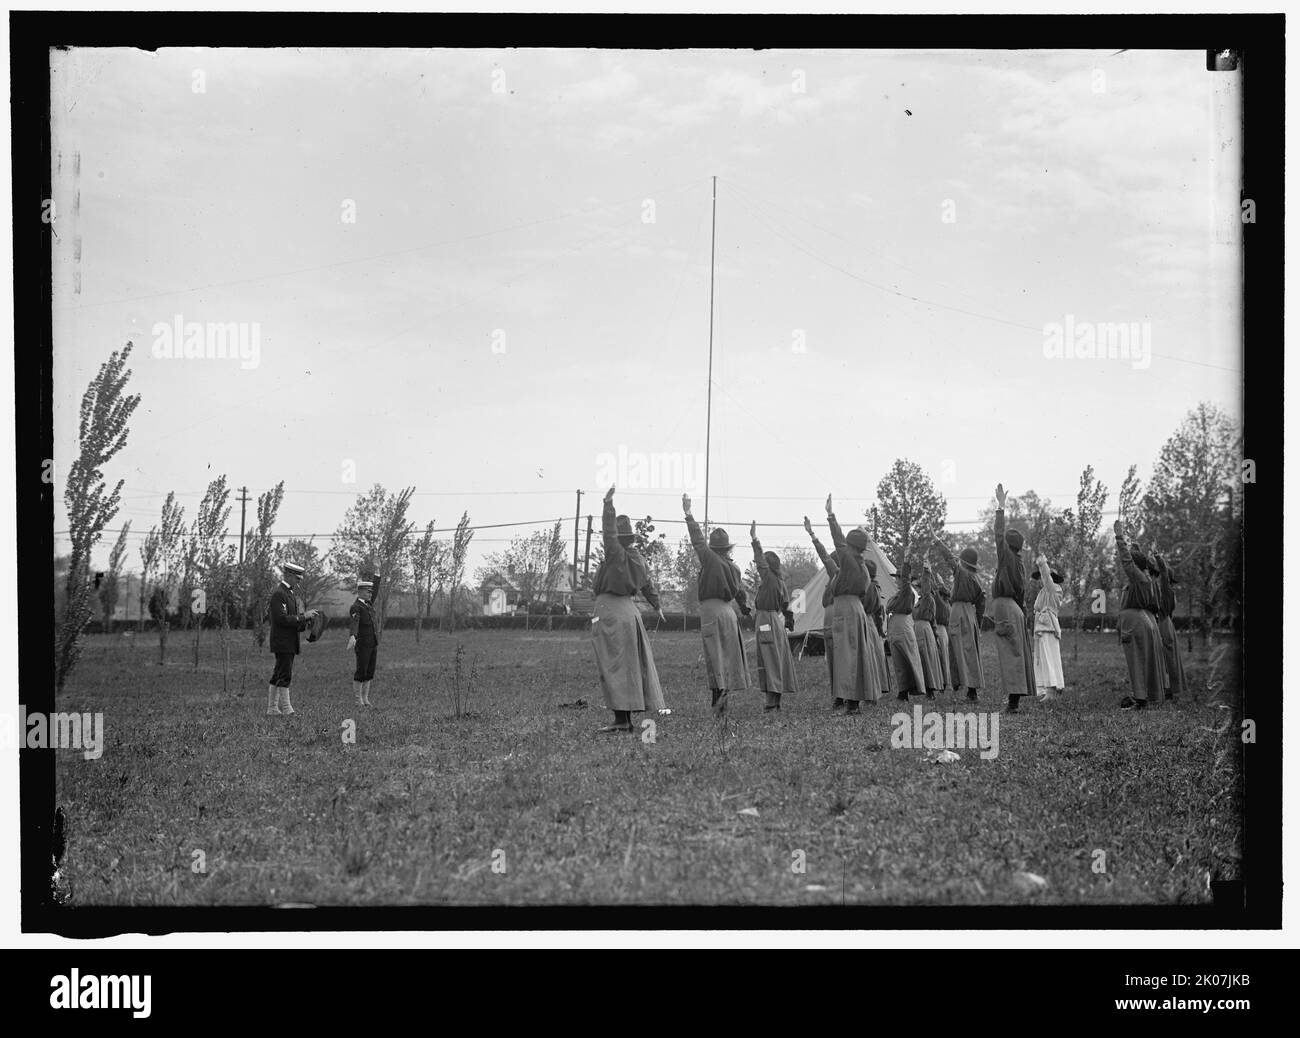 Signaling, between 1910 and 1917. USA. Man in military uniform teaching women (scout leaders?) semaphore. Stock Photo